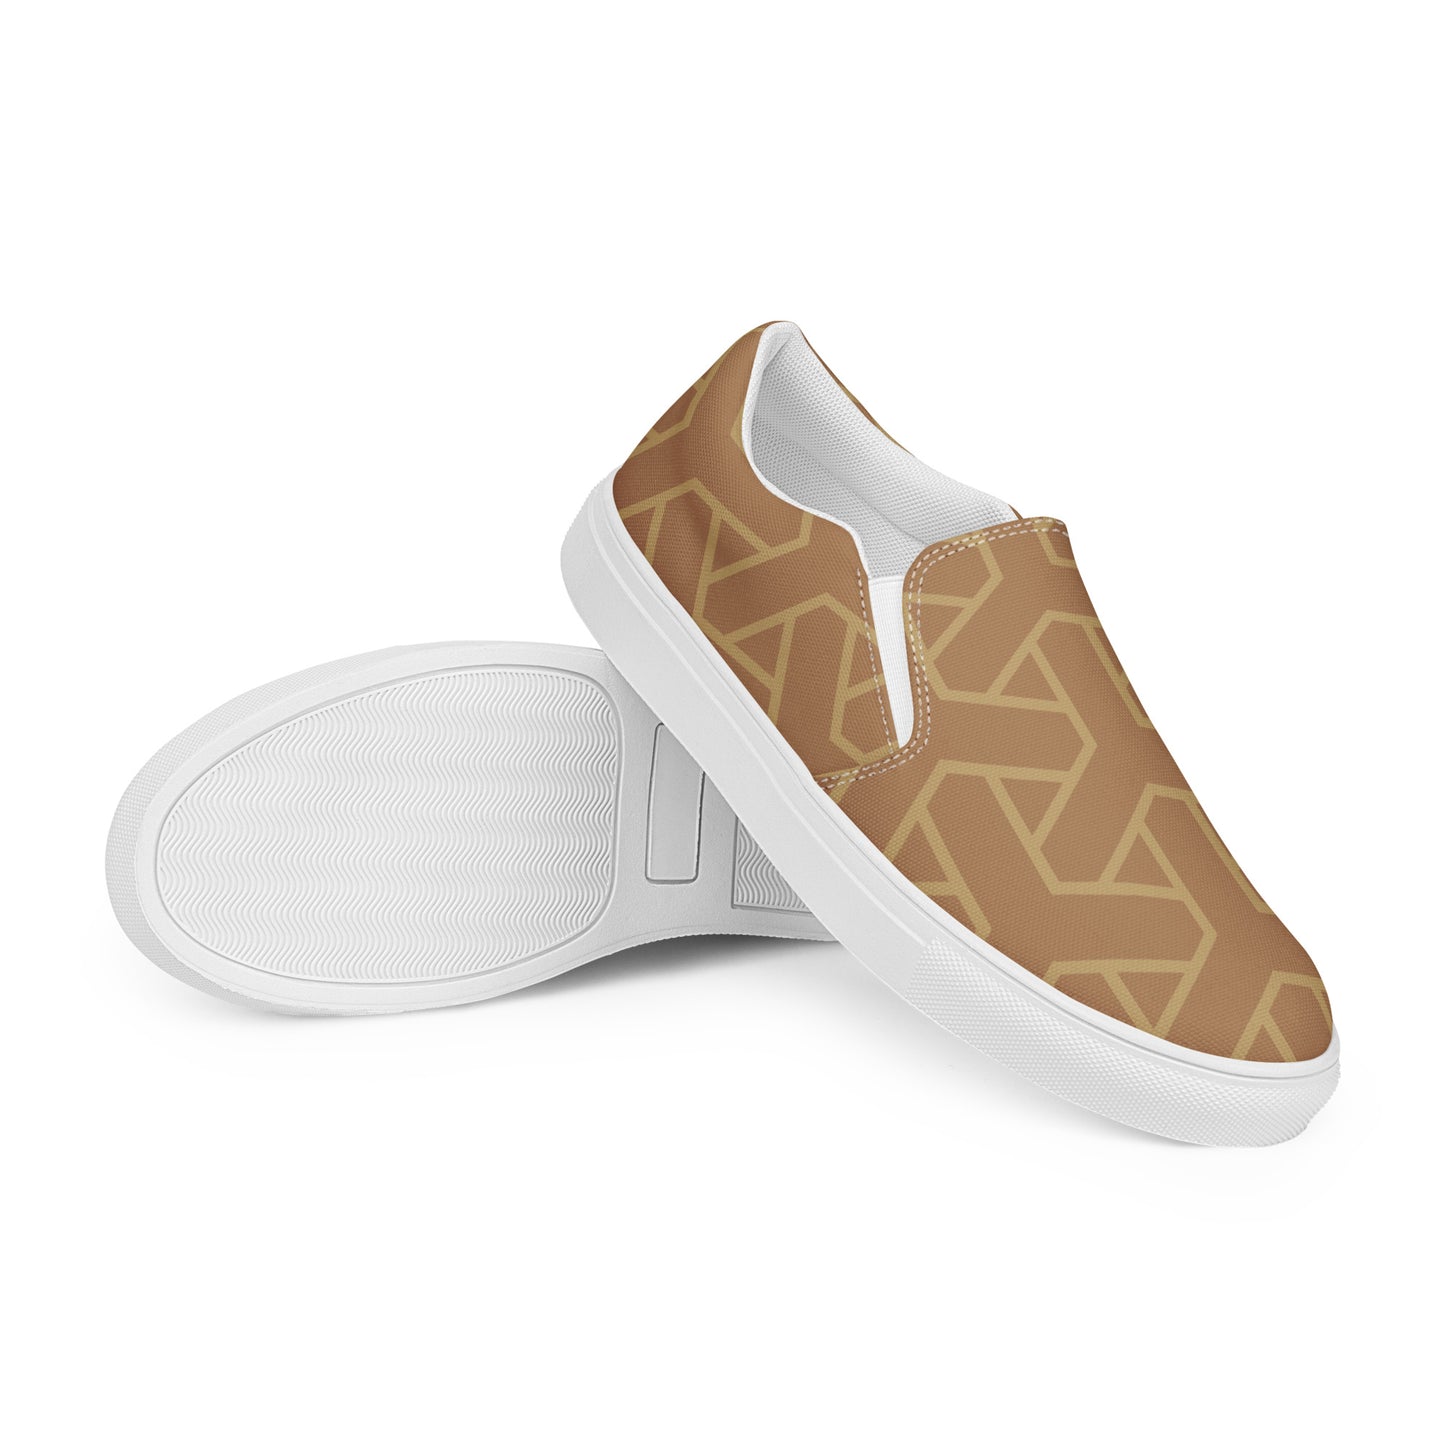 Woven Mocca - Sustainably Made Men's Slip-On Canvas Shoes